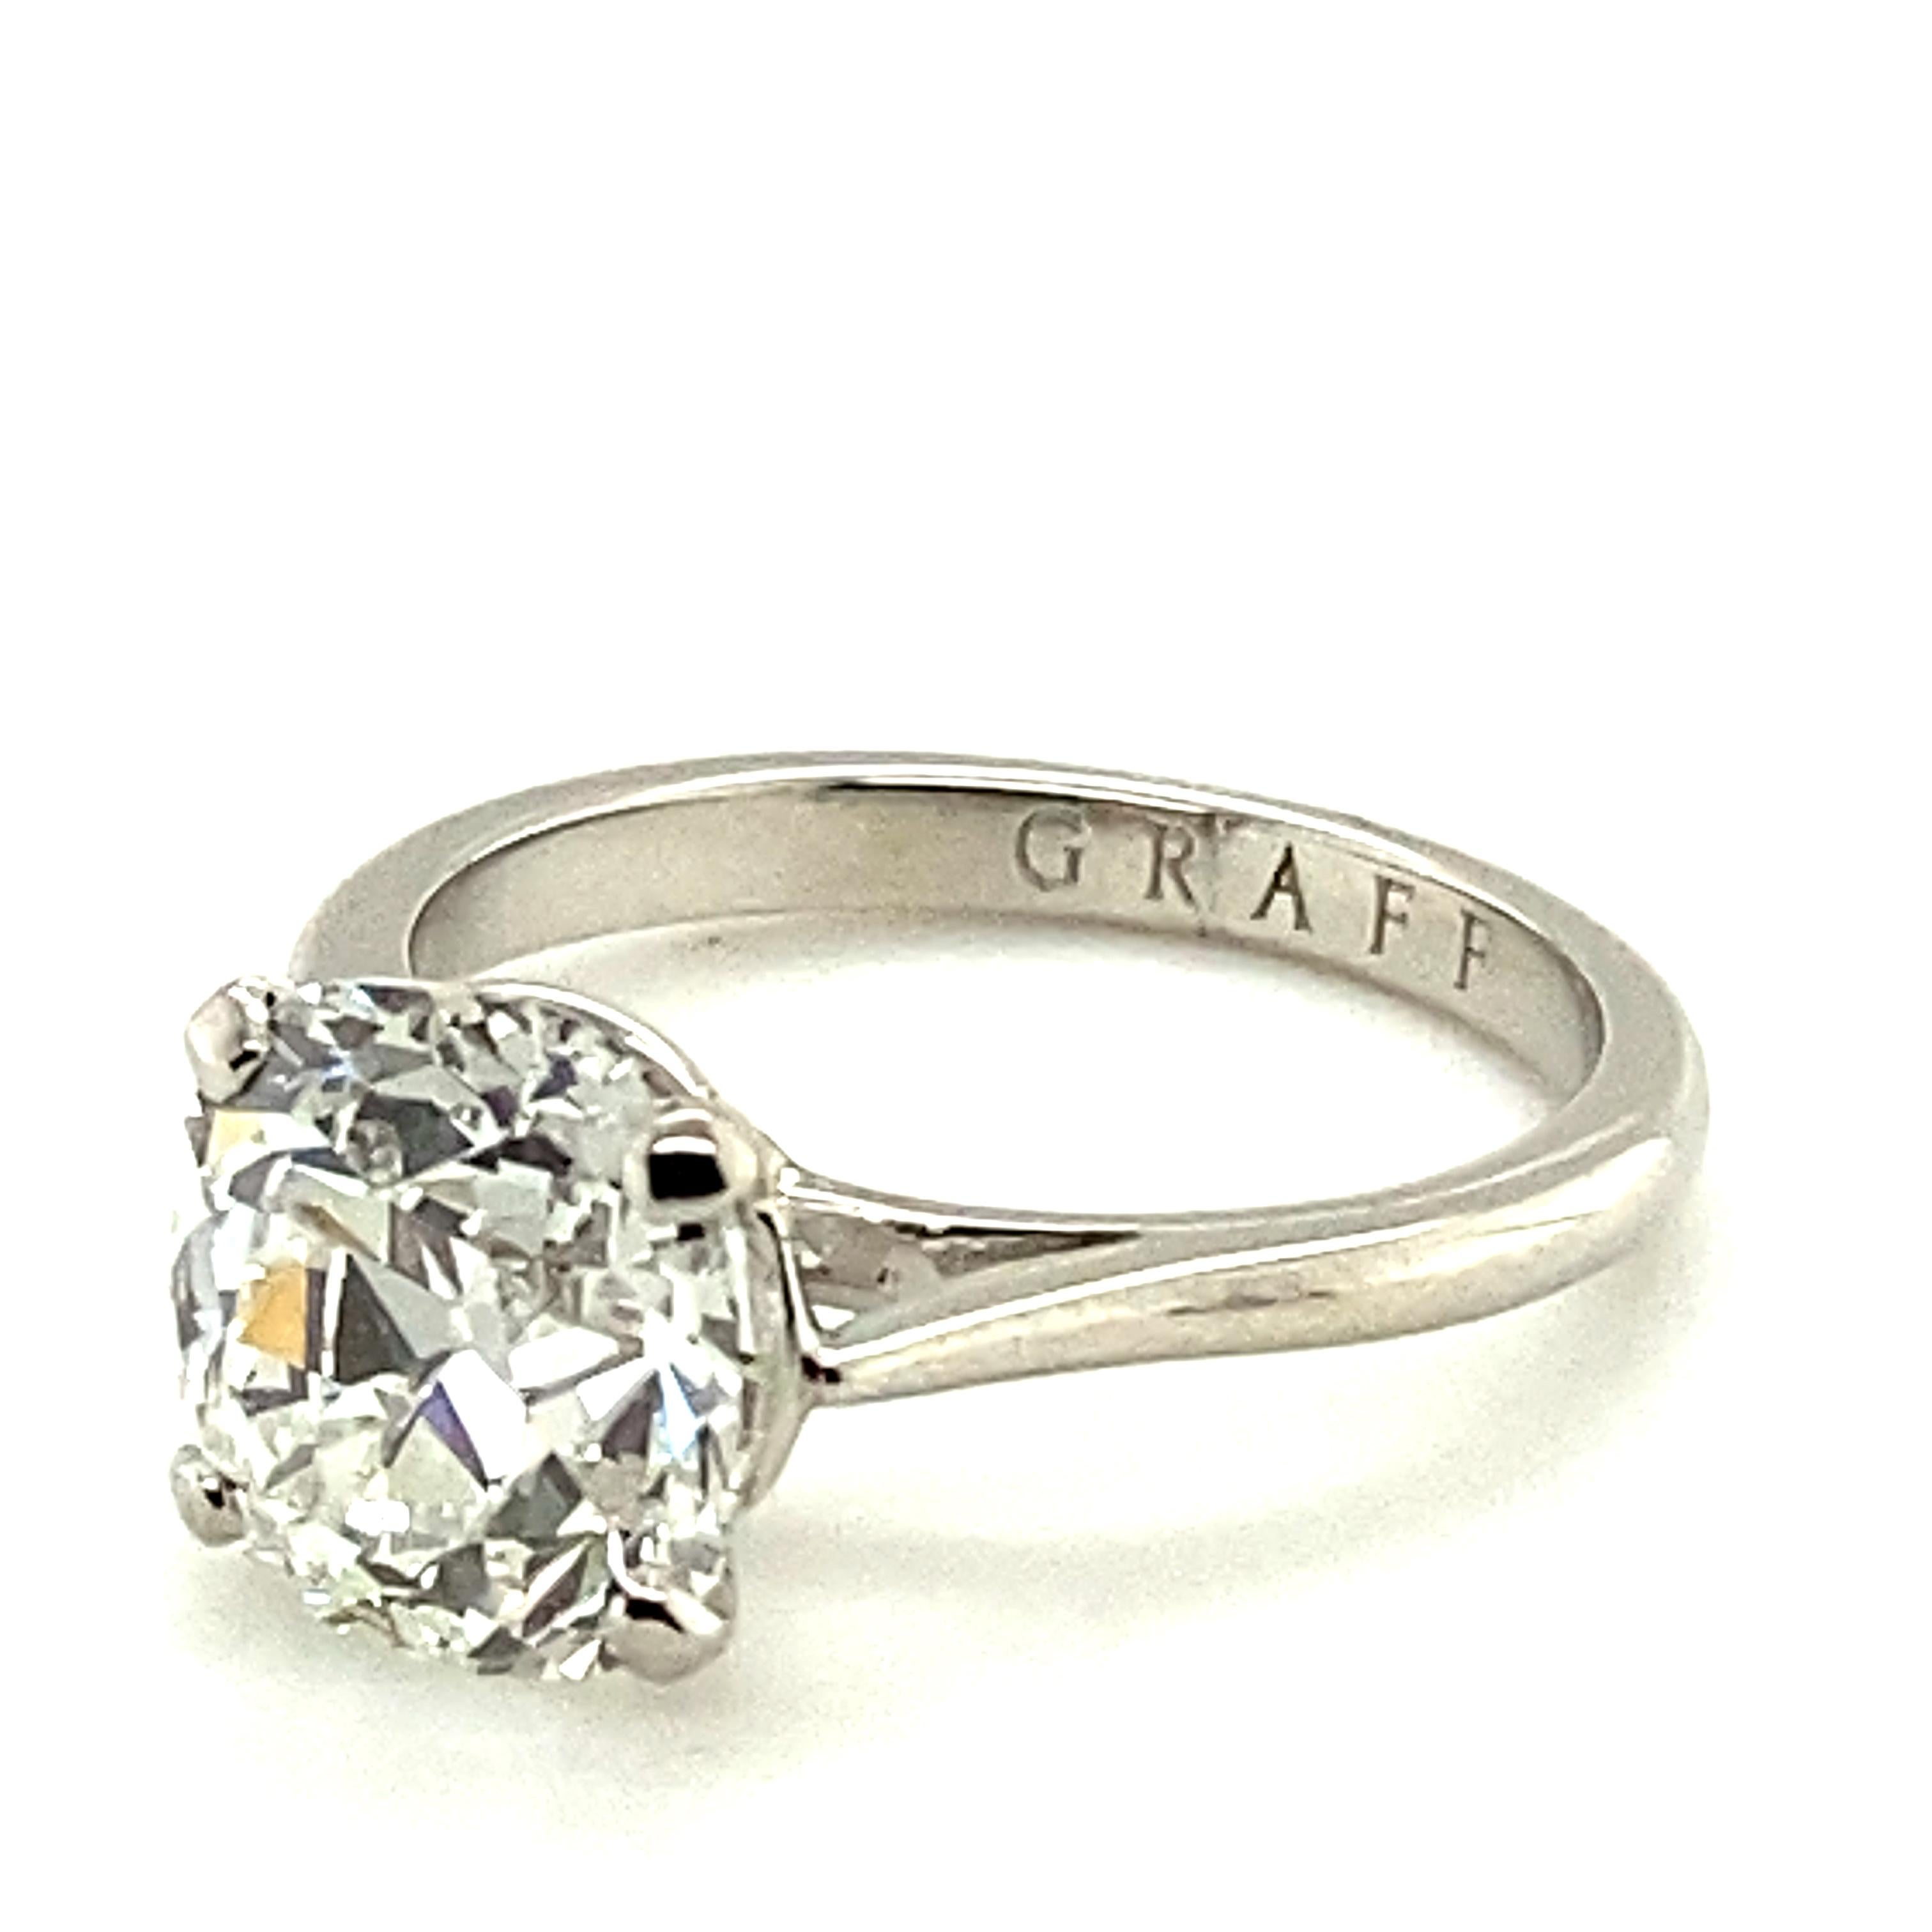 Contemporary Graff Ring in 18 Karat White Gold Set with a 3.14 Ct Cushion-Shaped Diamond